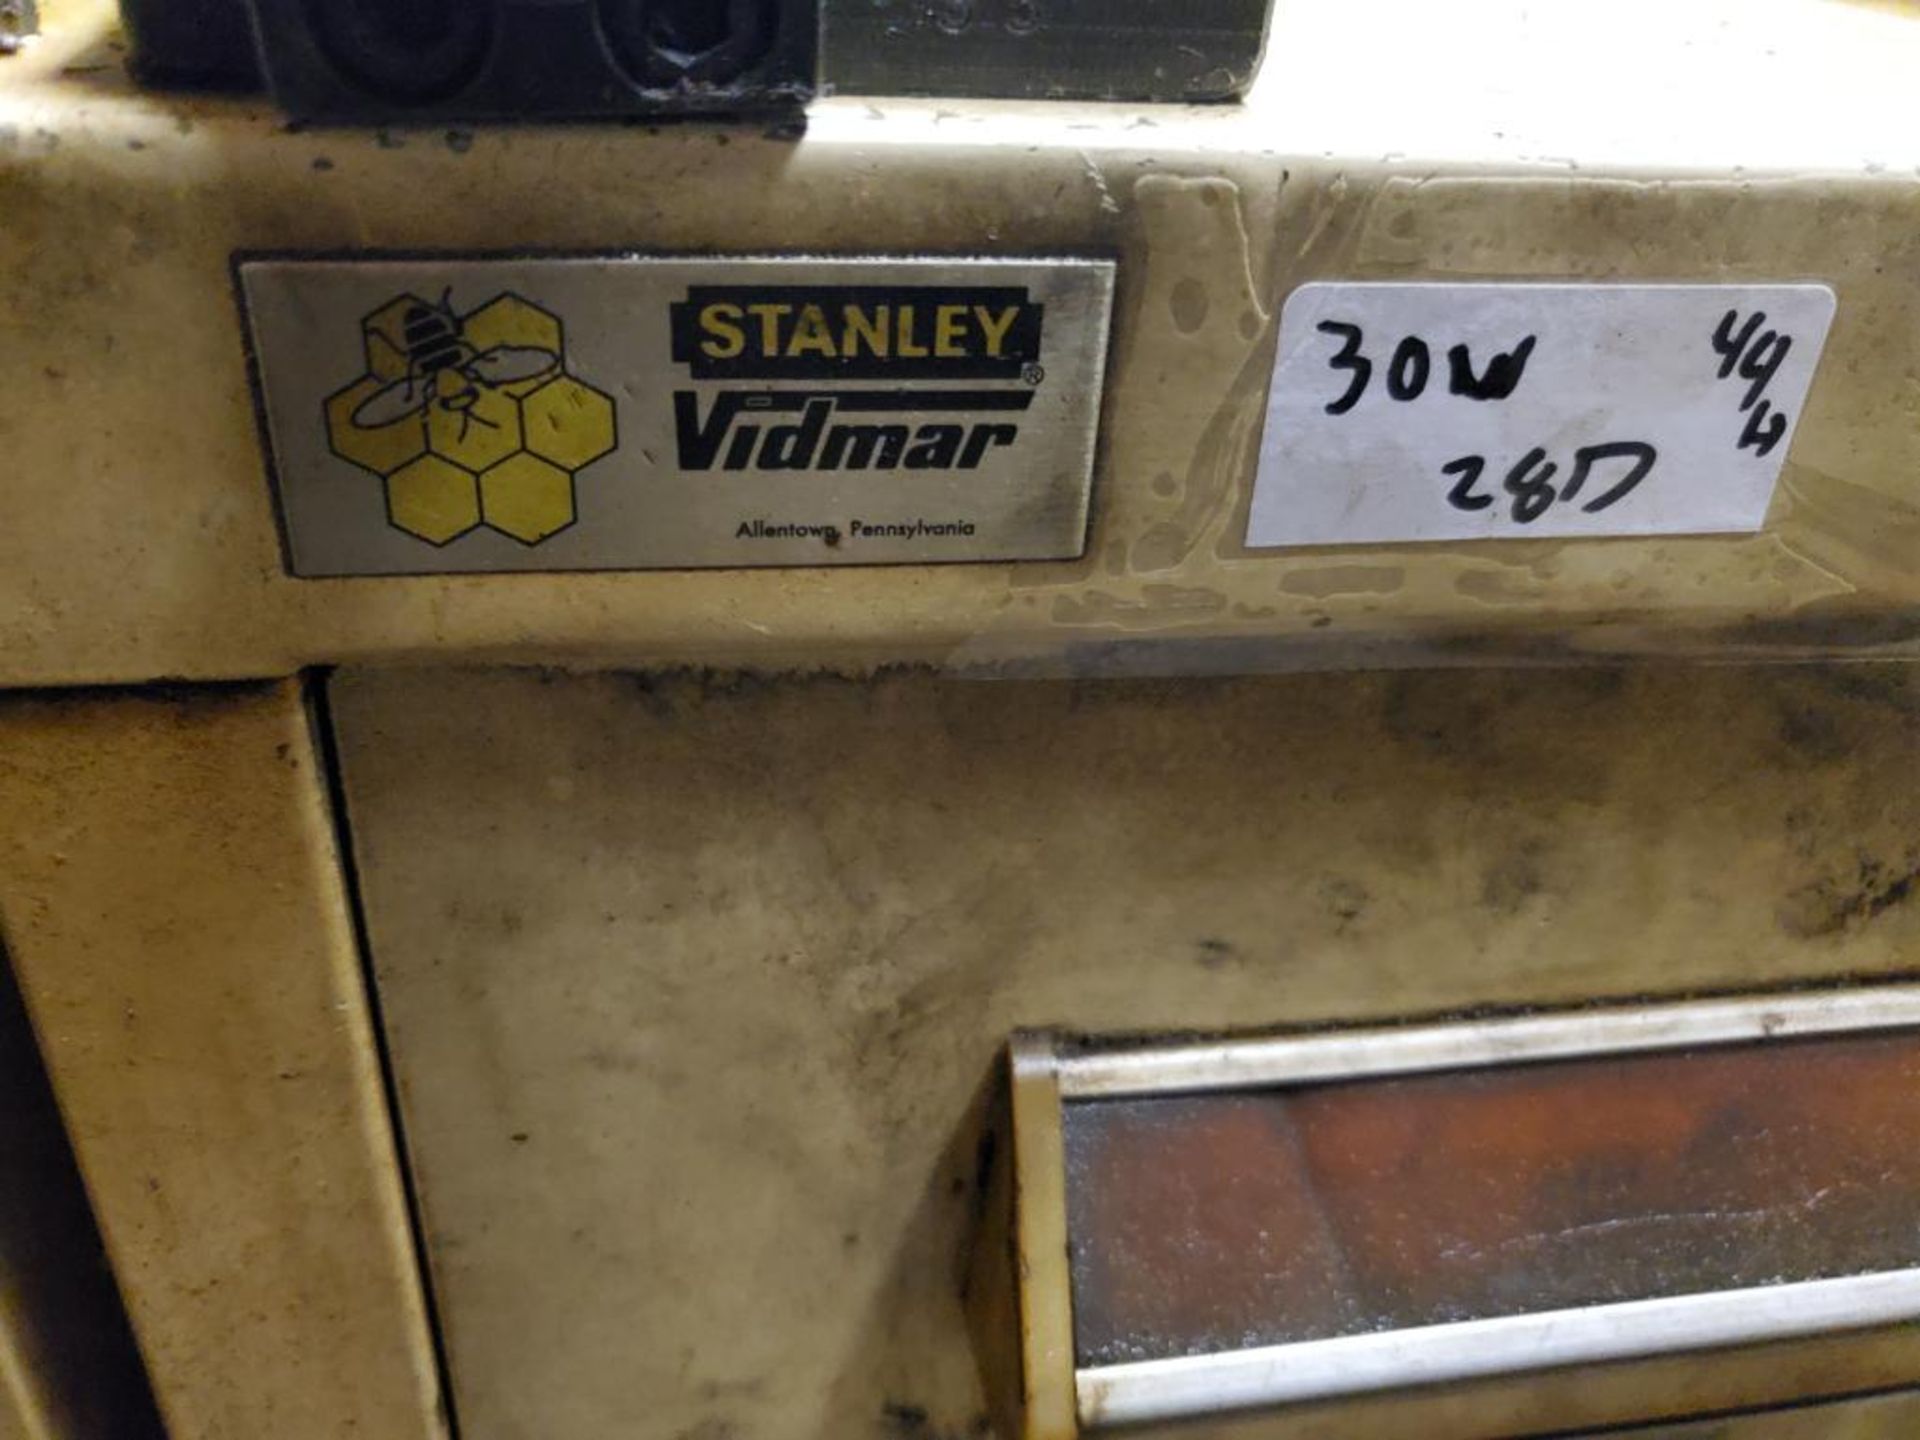 4 drawer Stanley Vidmar 44 tall x 30w x 28d. Contents not included. - Image 2 of 15